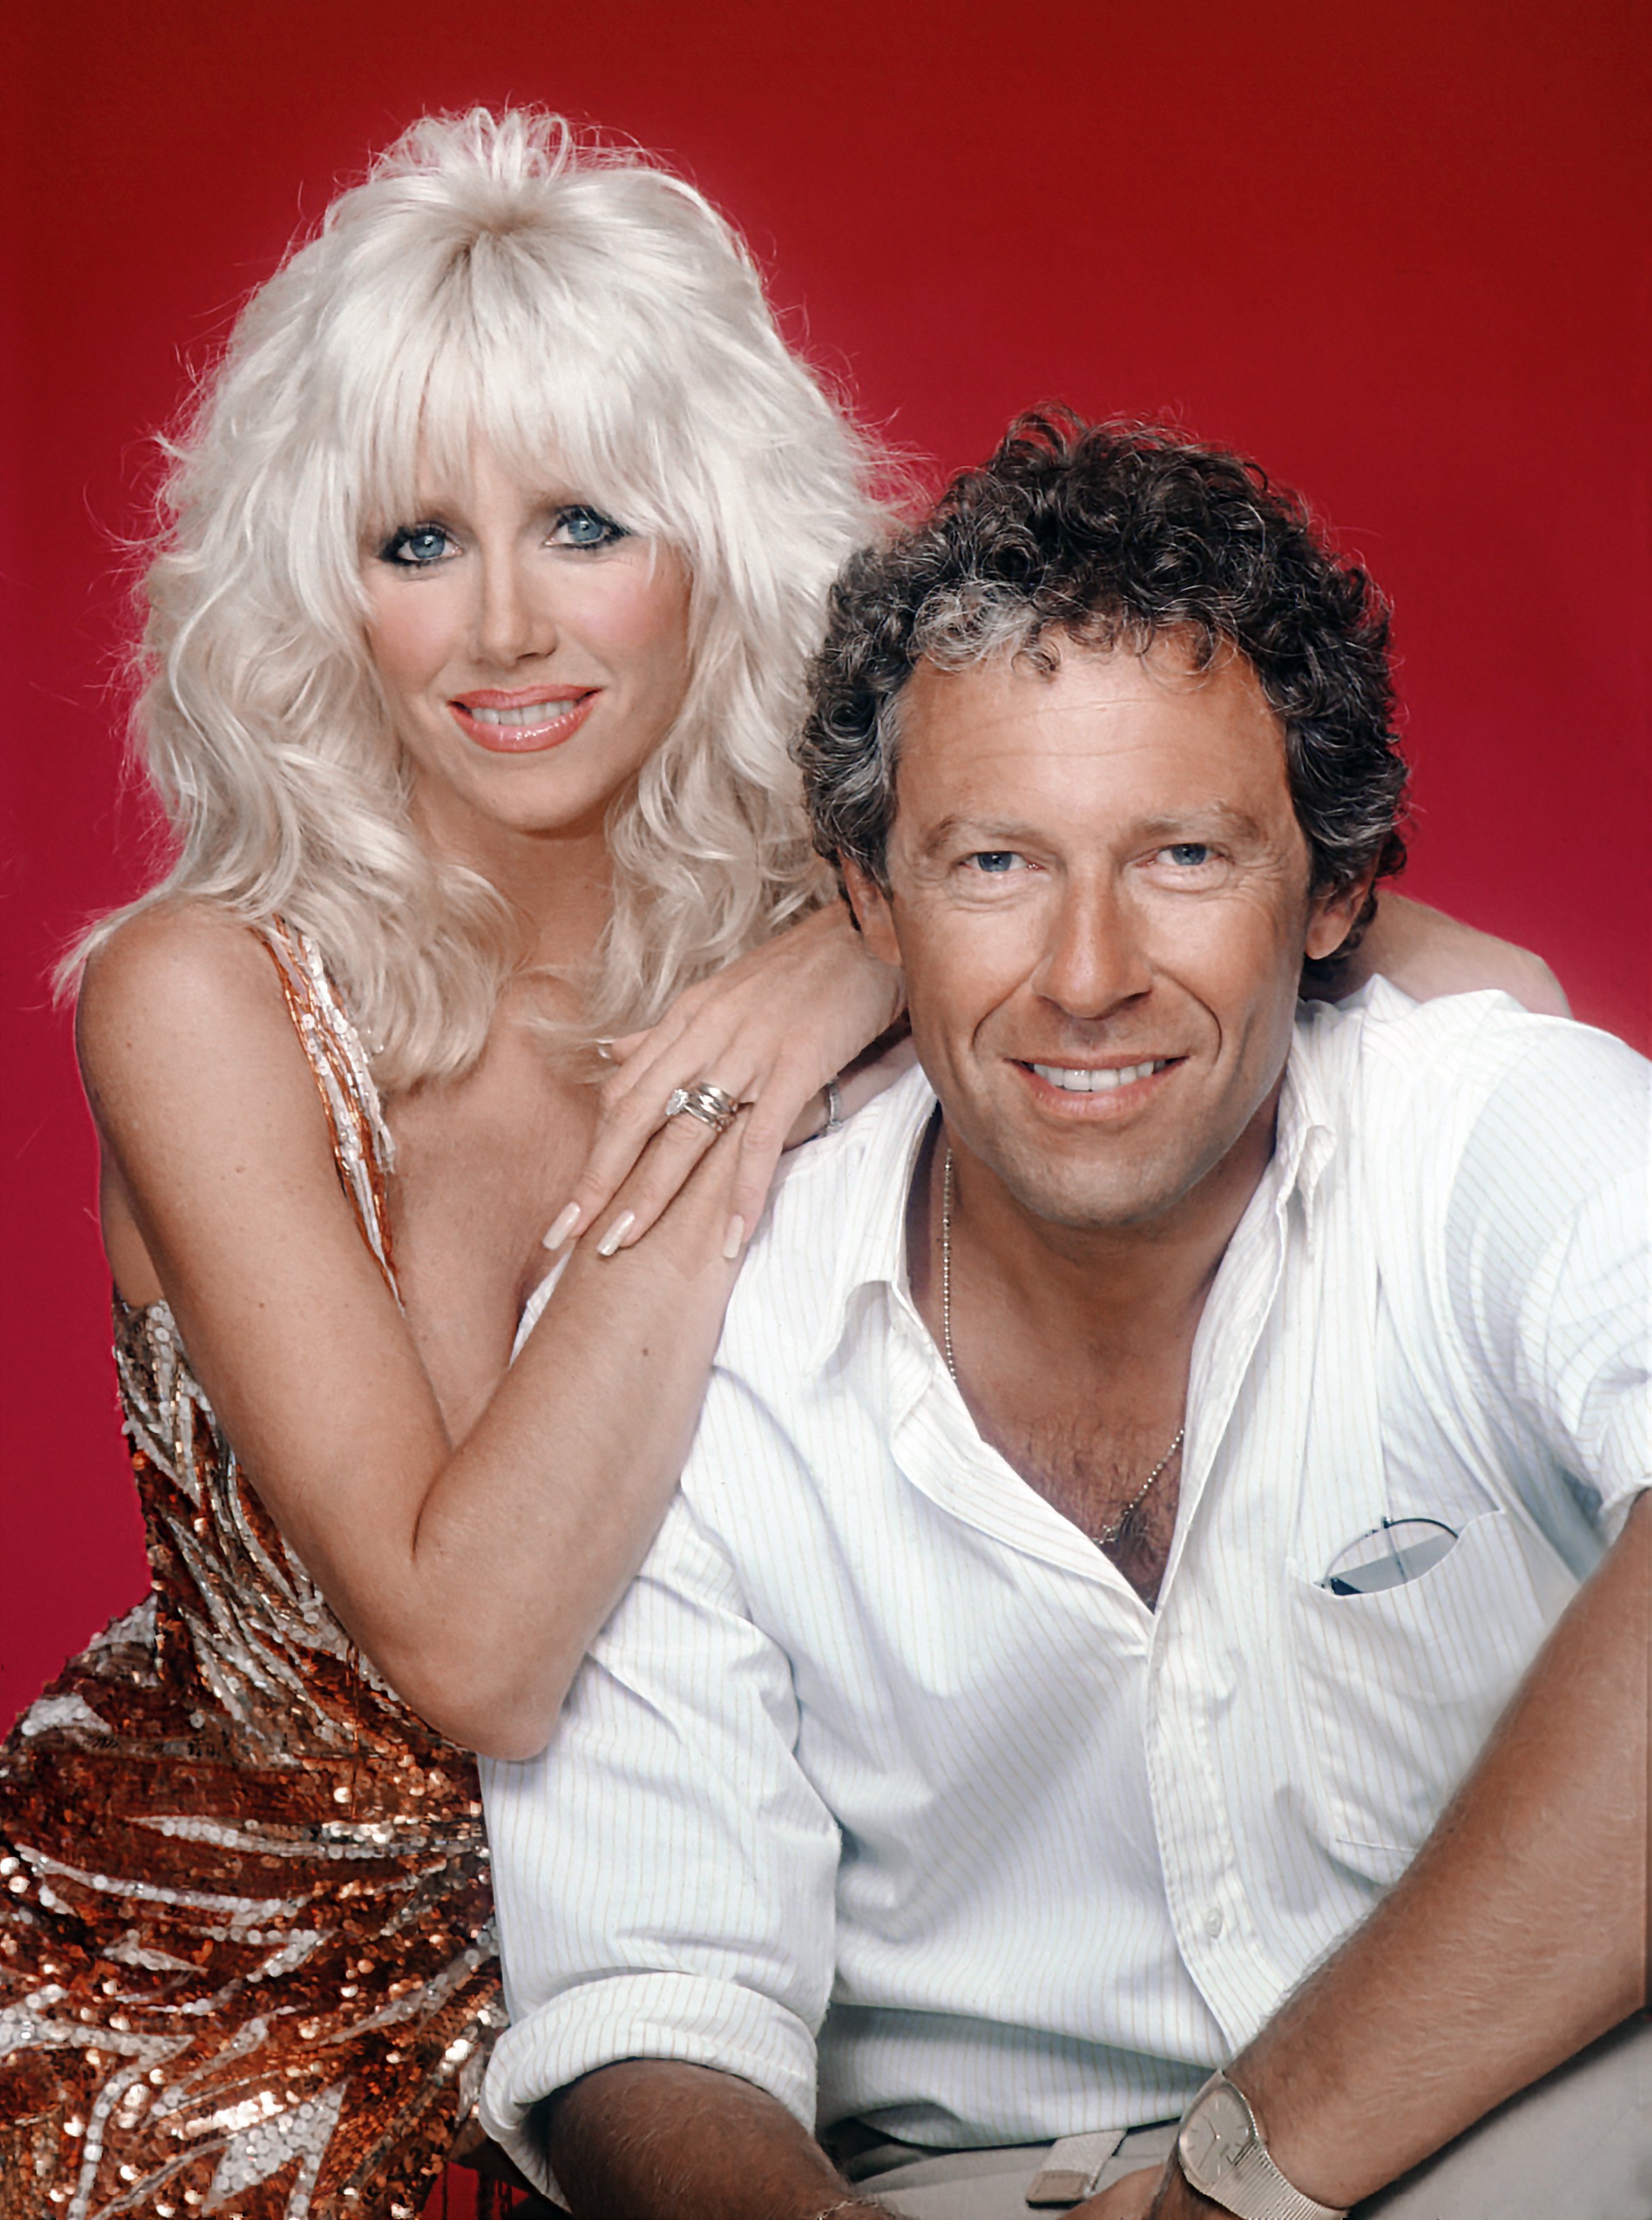 Suzanne Somers and husband Alan Hamel poses for a portrait in 1980 in Los Angeles, California | Source: Getty Images